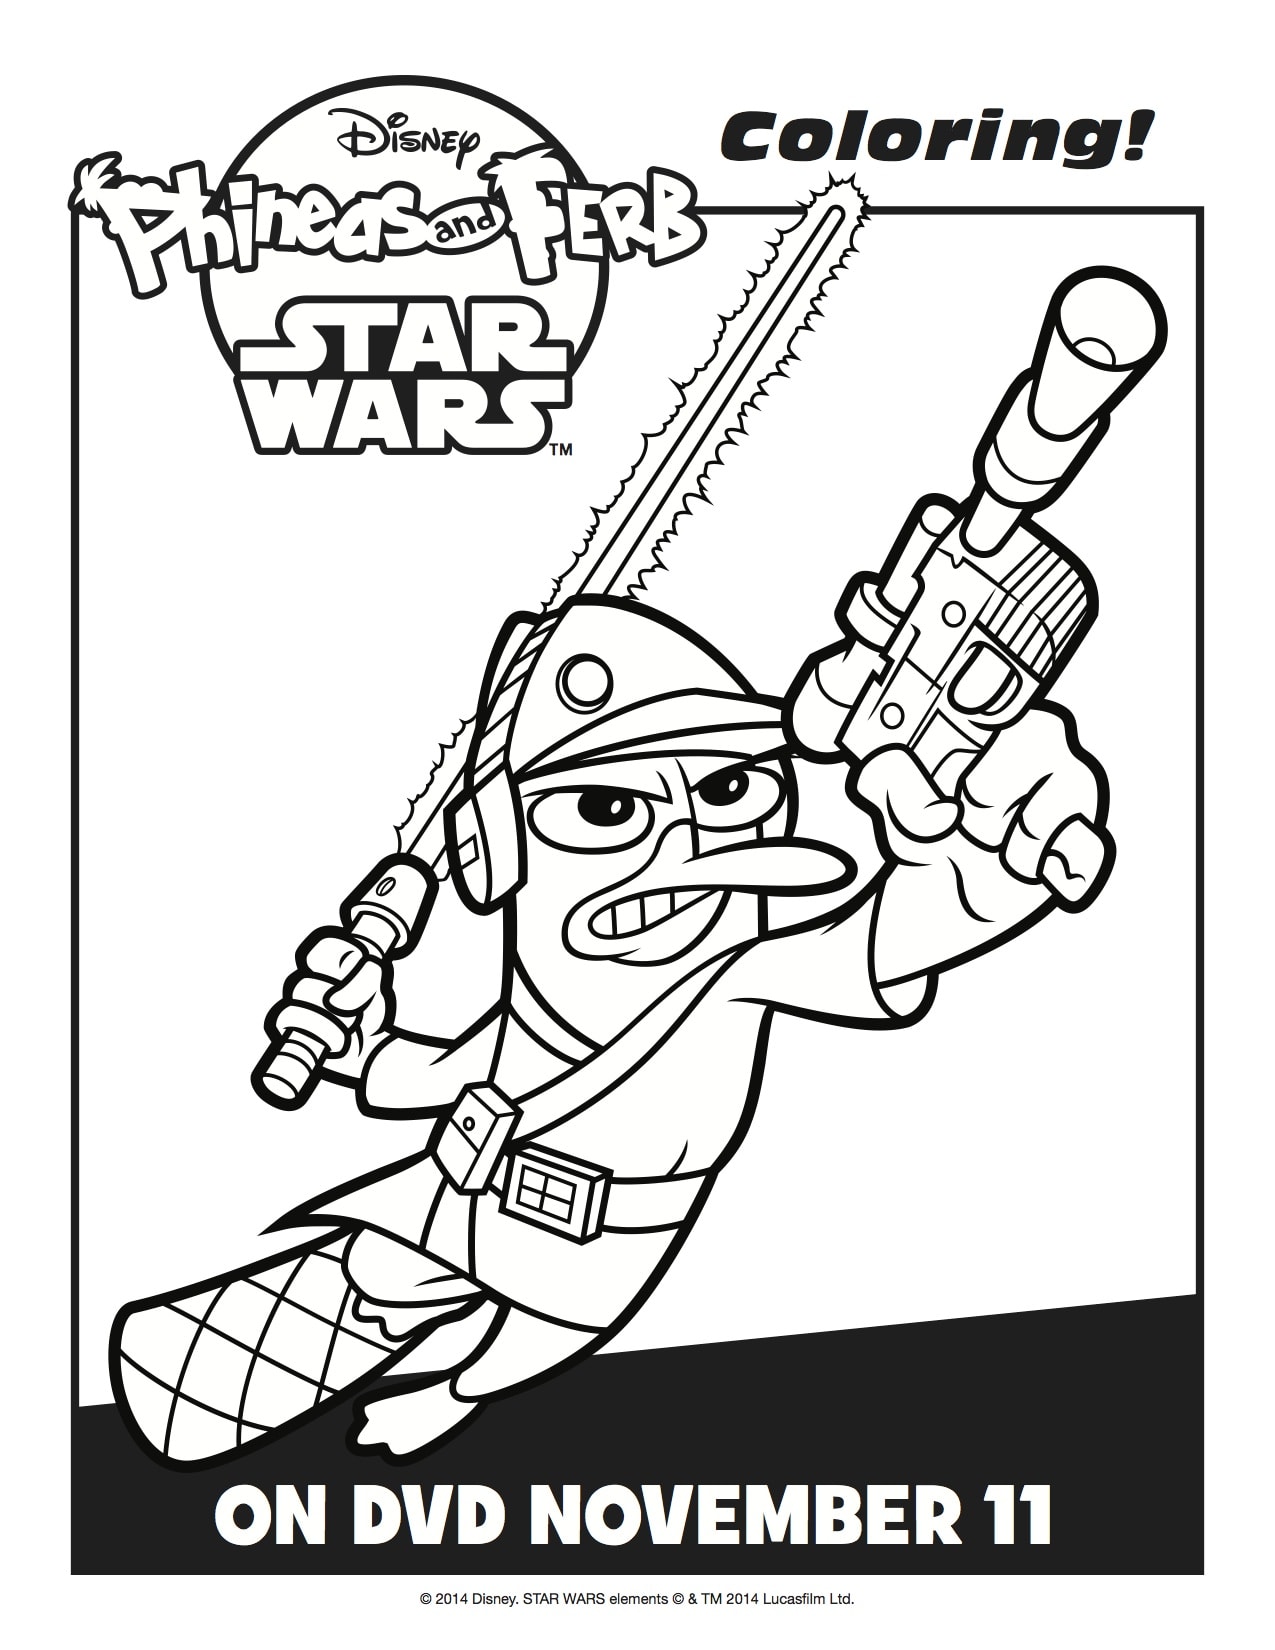 Activity Sheets: Phineas and Ferb: Star Wars on DVD Now